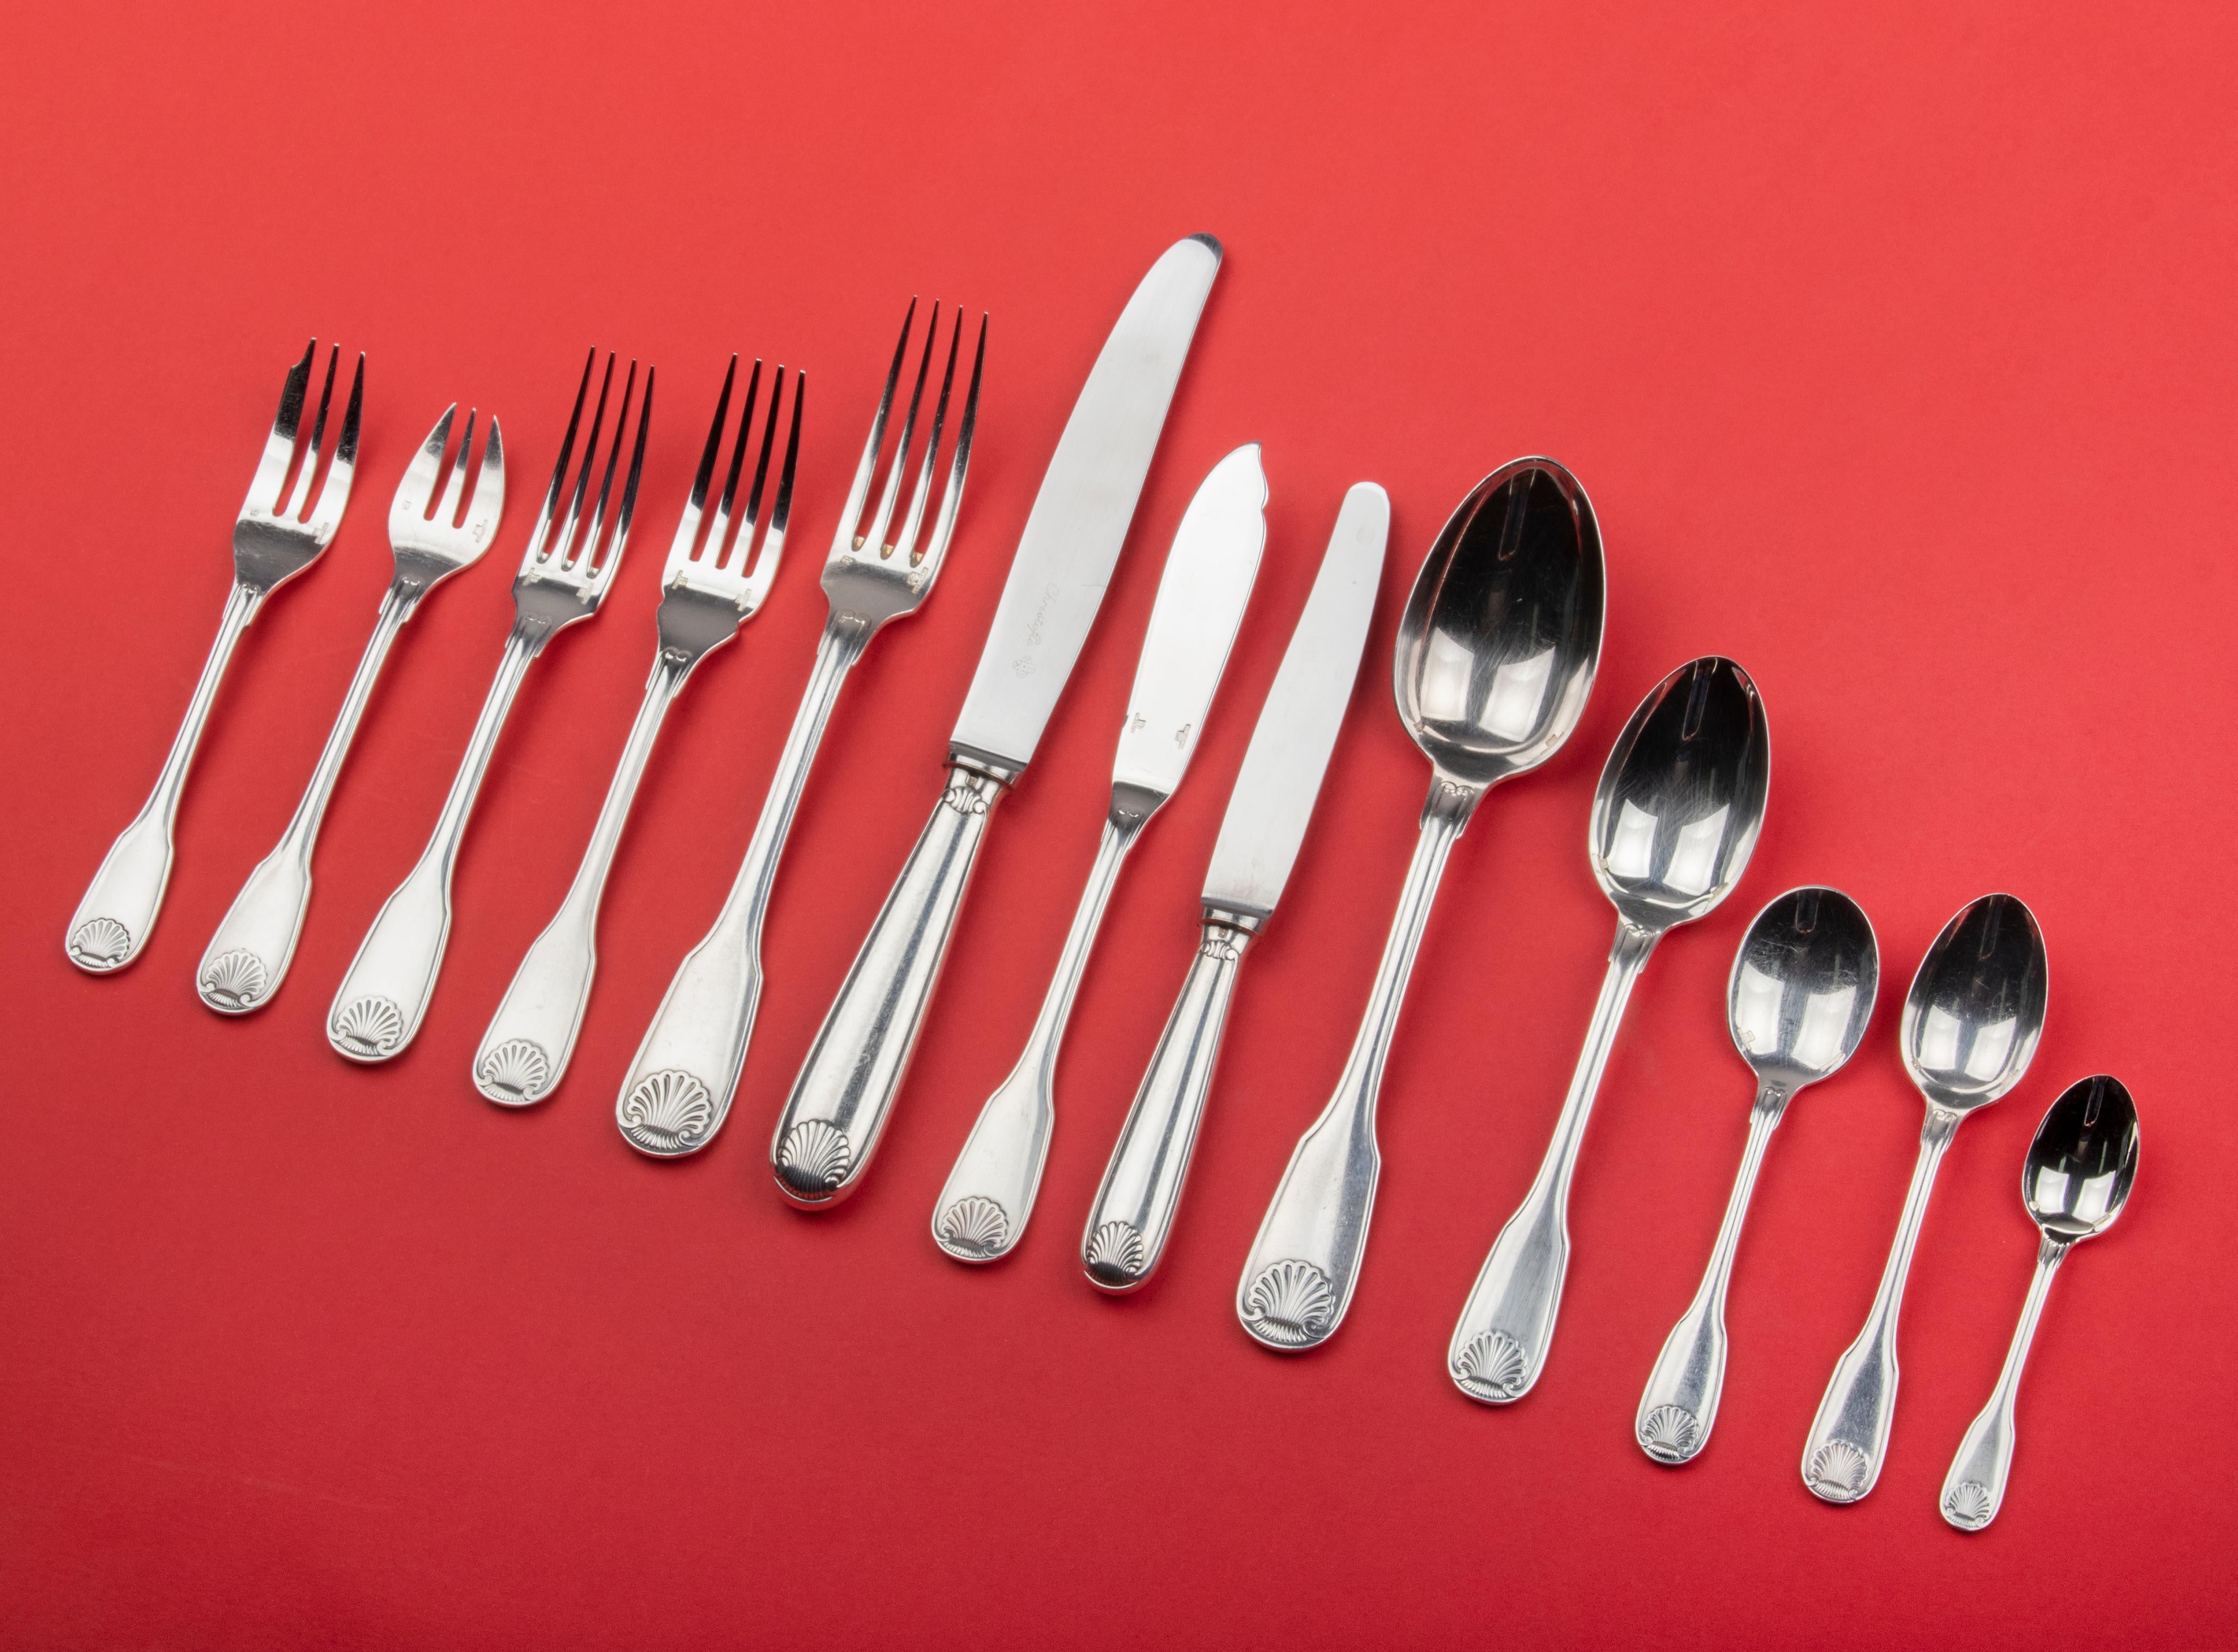 Great silver plated cutlery cassette from the French brand Christofle. The cutlery is for 12 people and very complete, with many types of serving cutlery. 170 parts in total. The model is Vendome, also called scallop. A classic and timeless decor